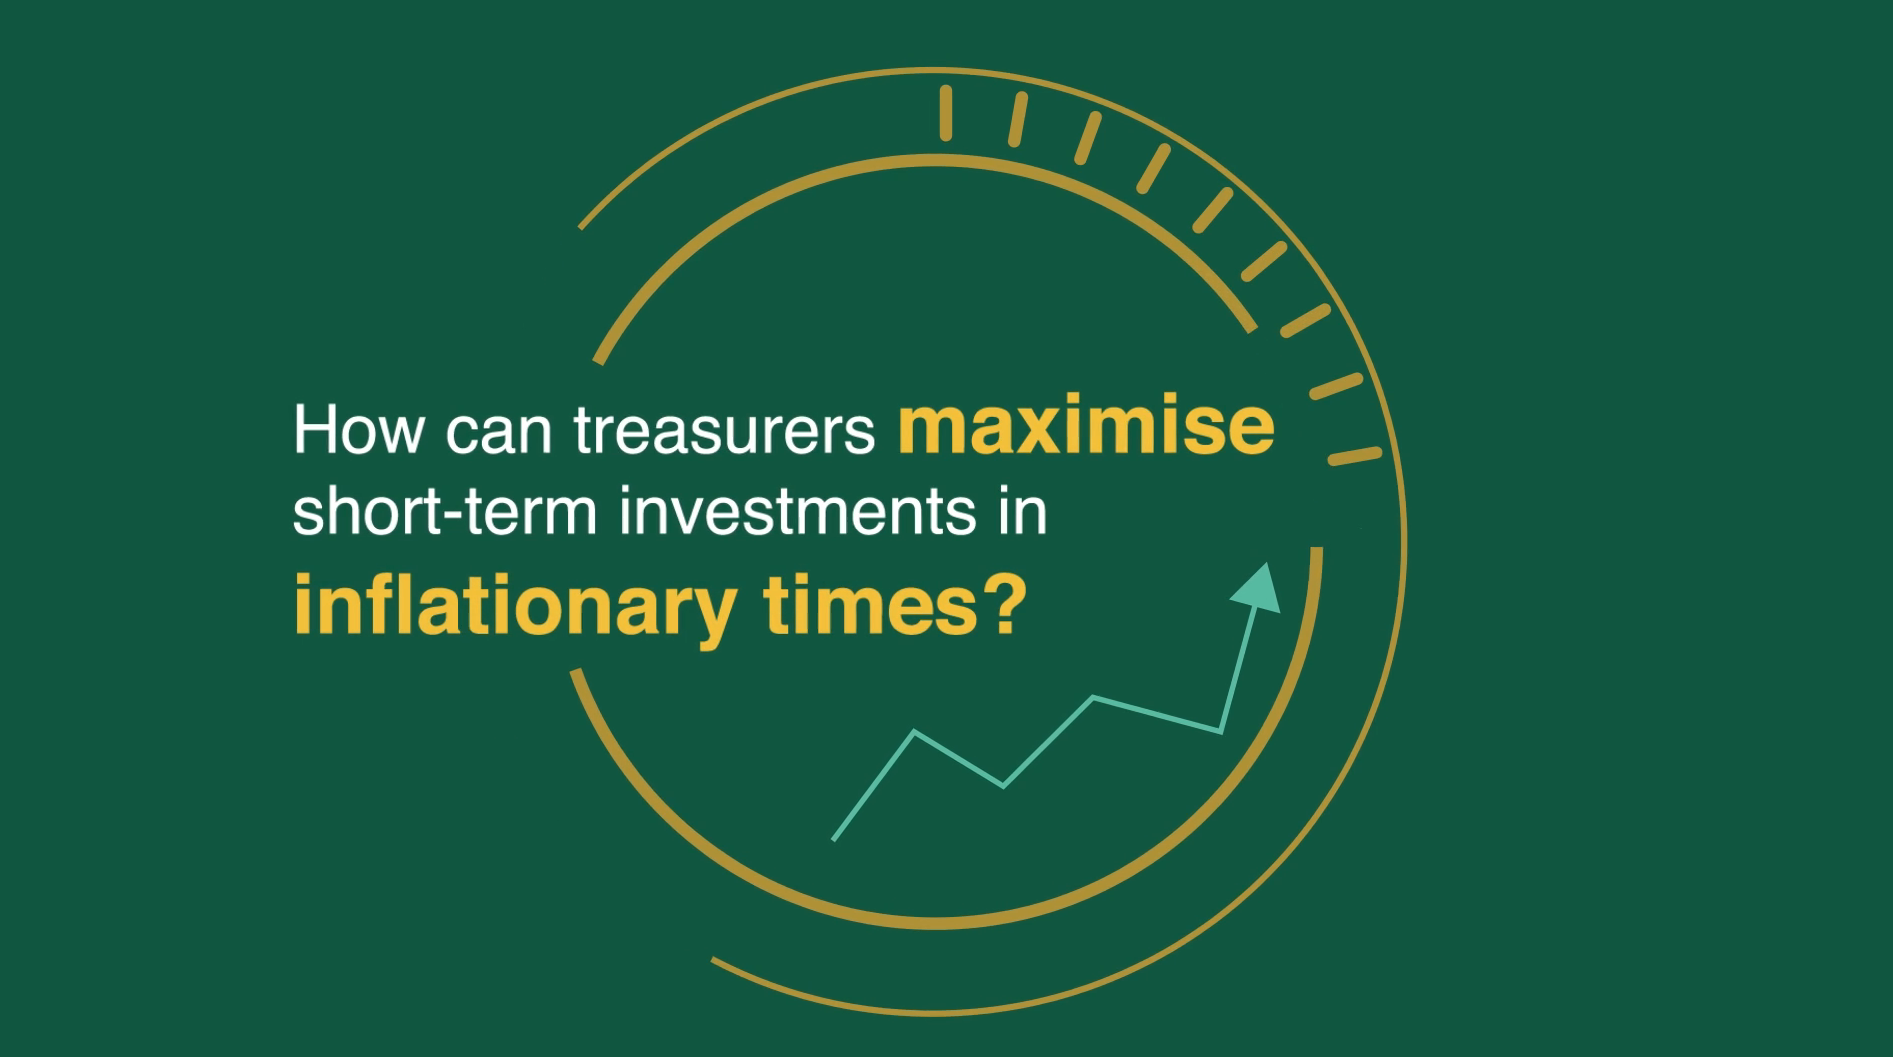 TMI's Guide to Short-term Investment for Treasurers